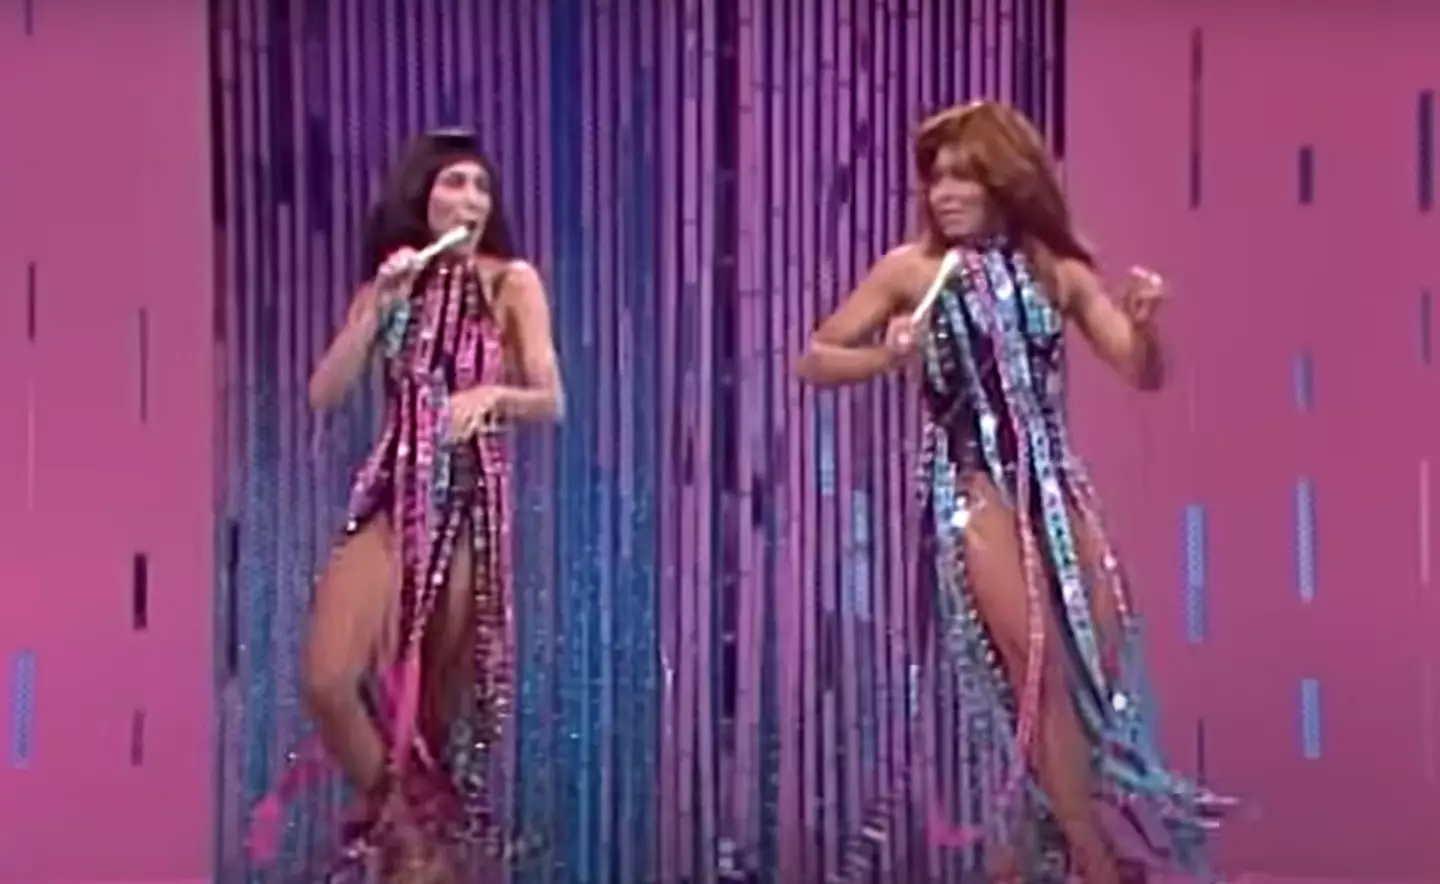 Tina joined Cher on her show back in 1975.